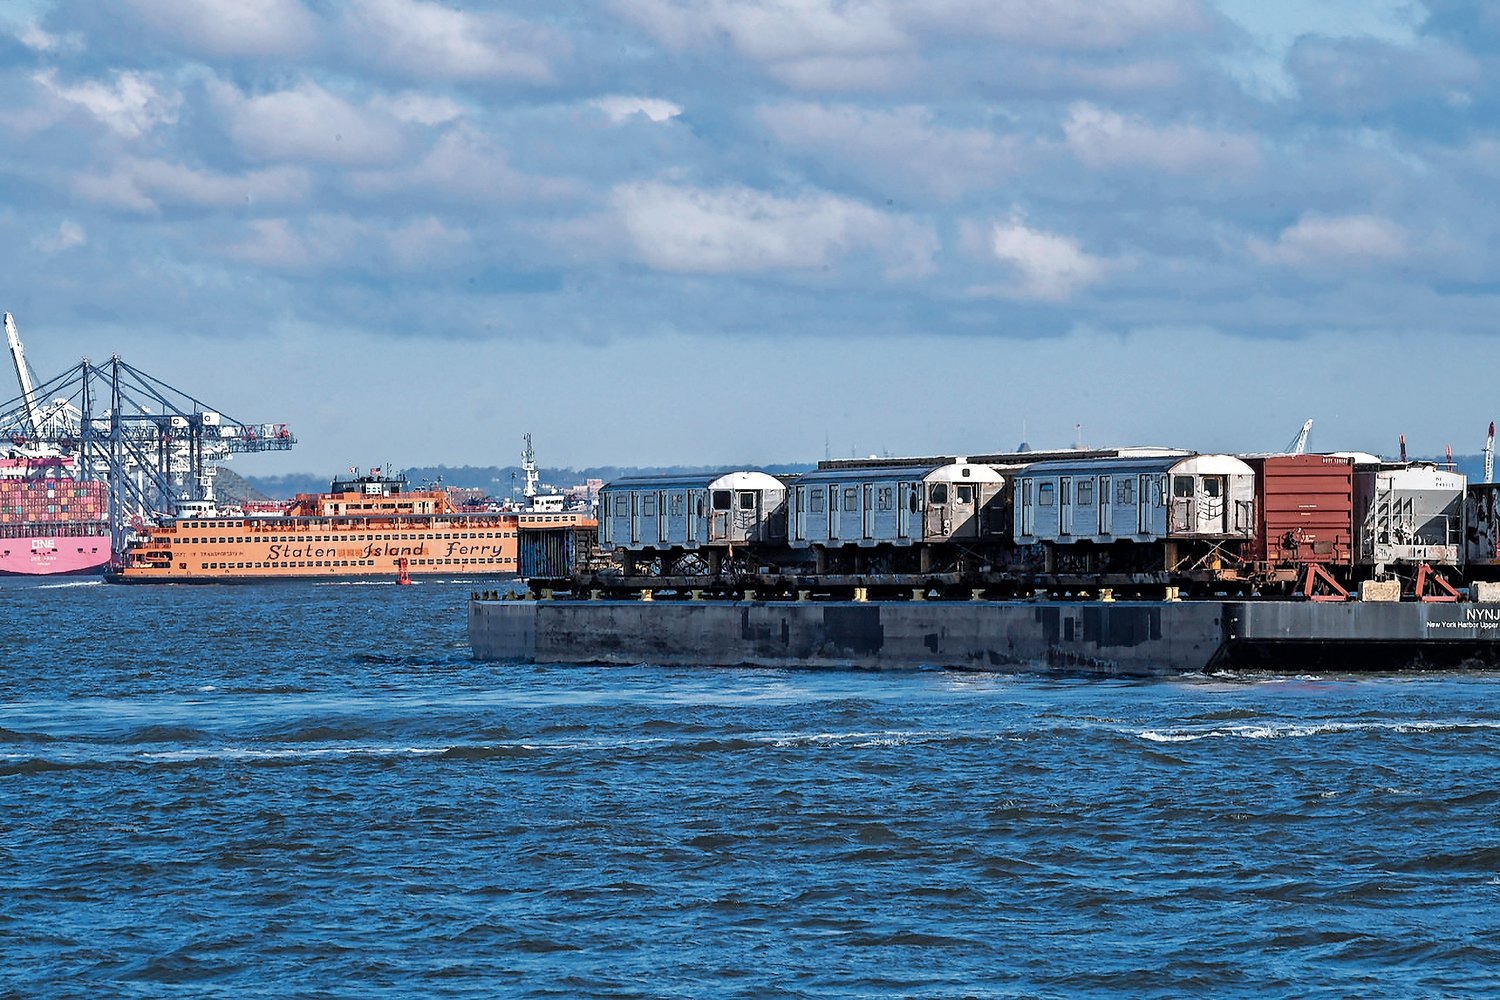 Six decommissioned R32 subway cars are moved from the 65th St. Yard by New York New Jersey Rail aboard a car float bound for Greenville Yard on Thursday, May 5, 2022. The cars are en route to their final destination in Ohio for scrapping.